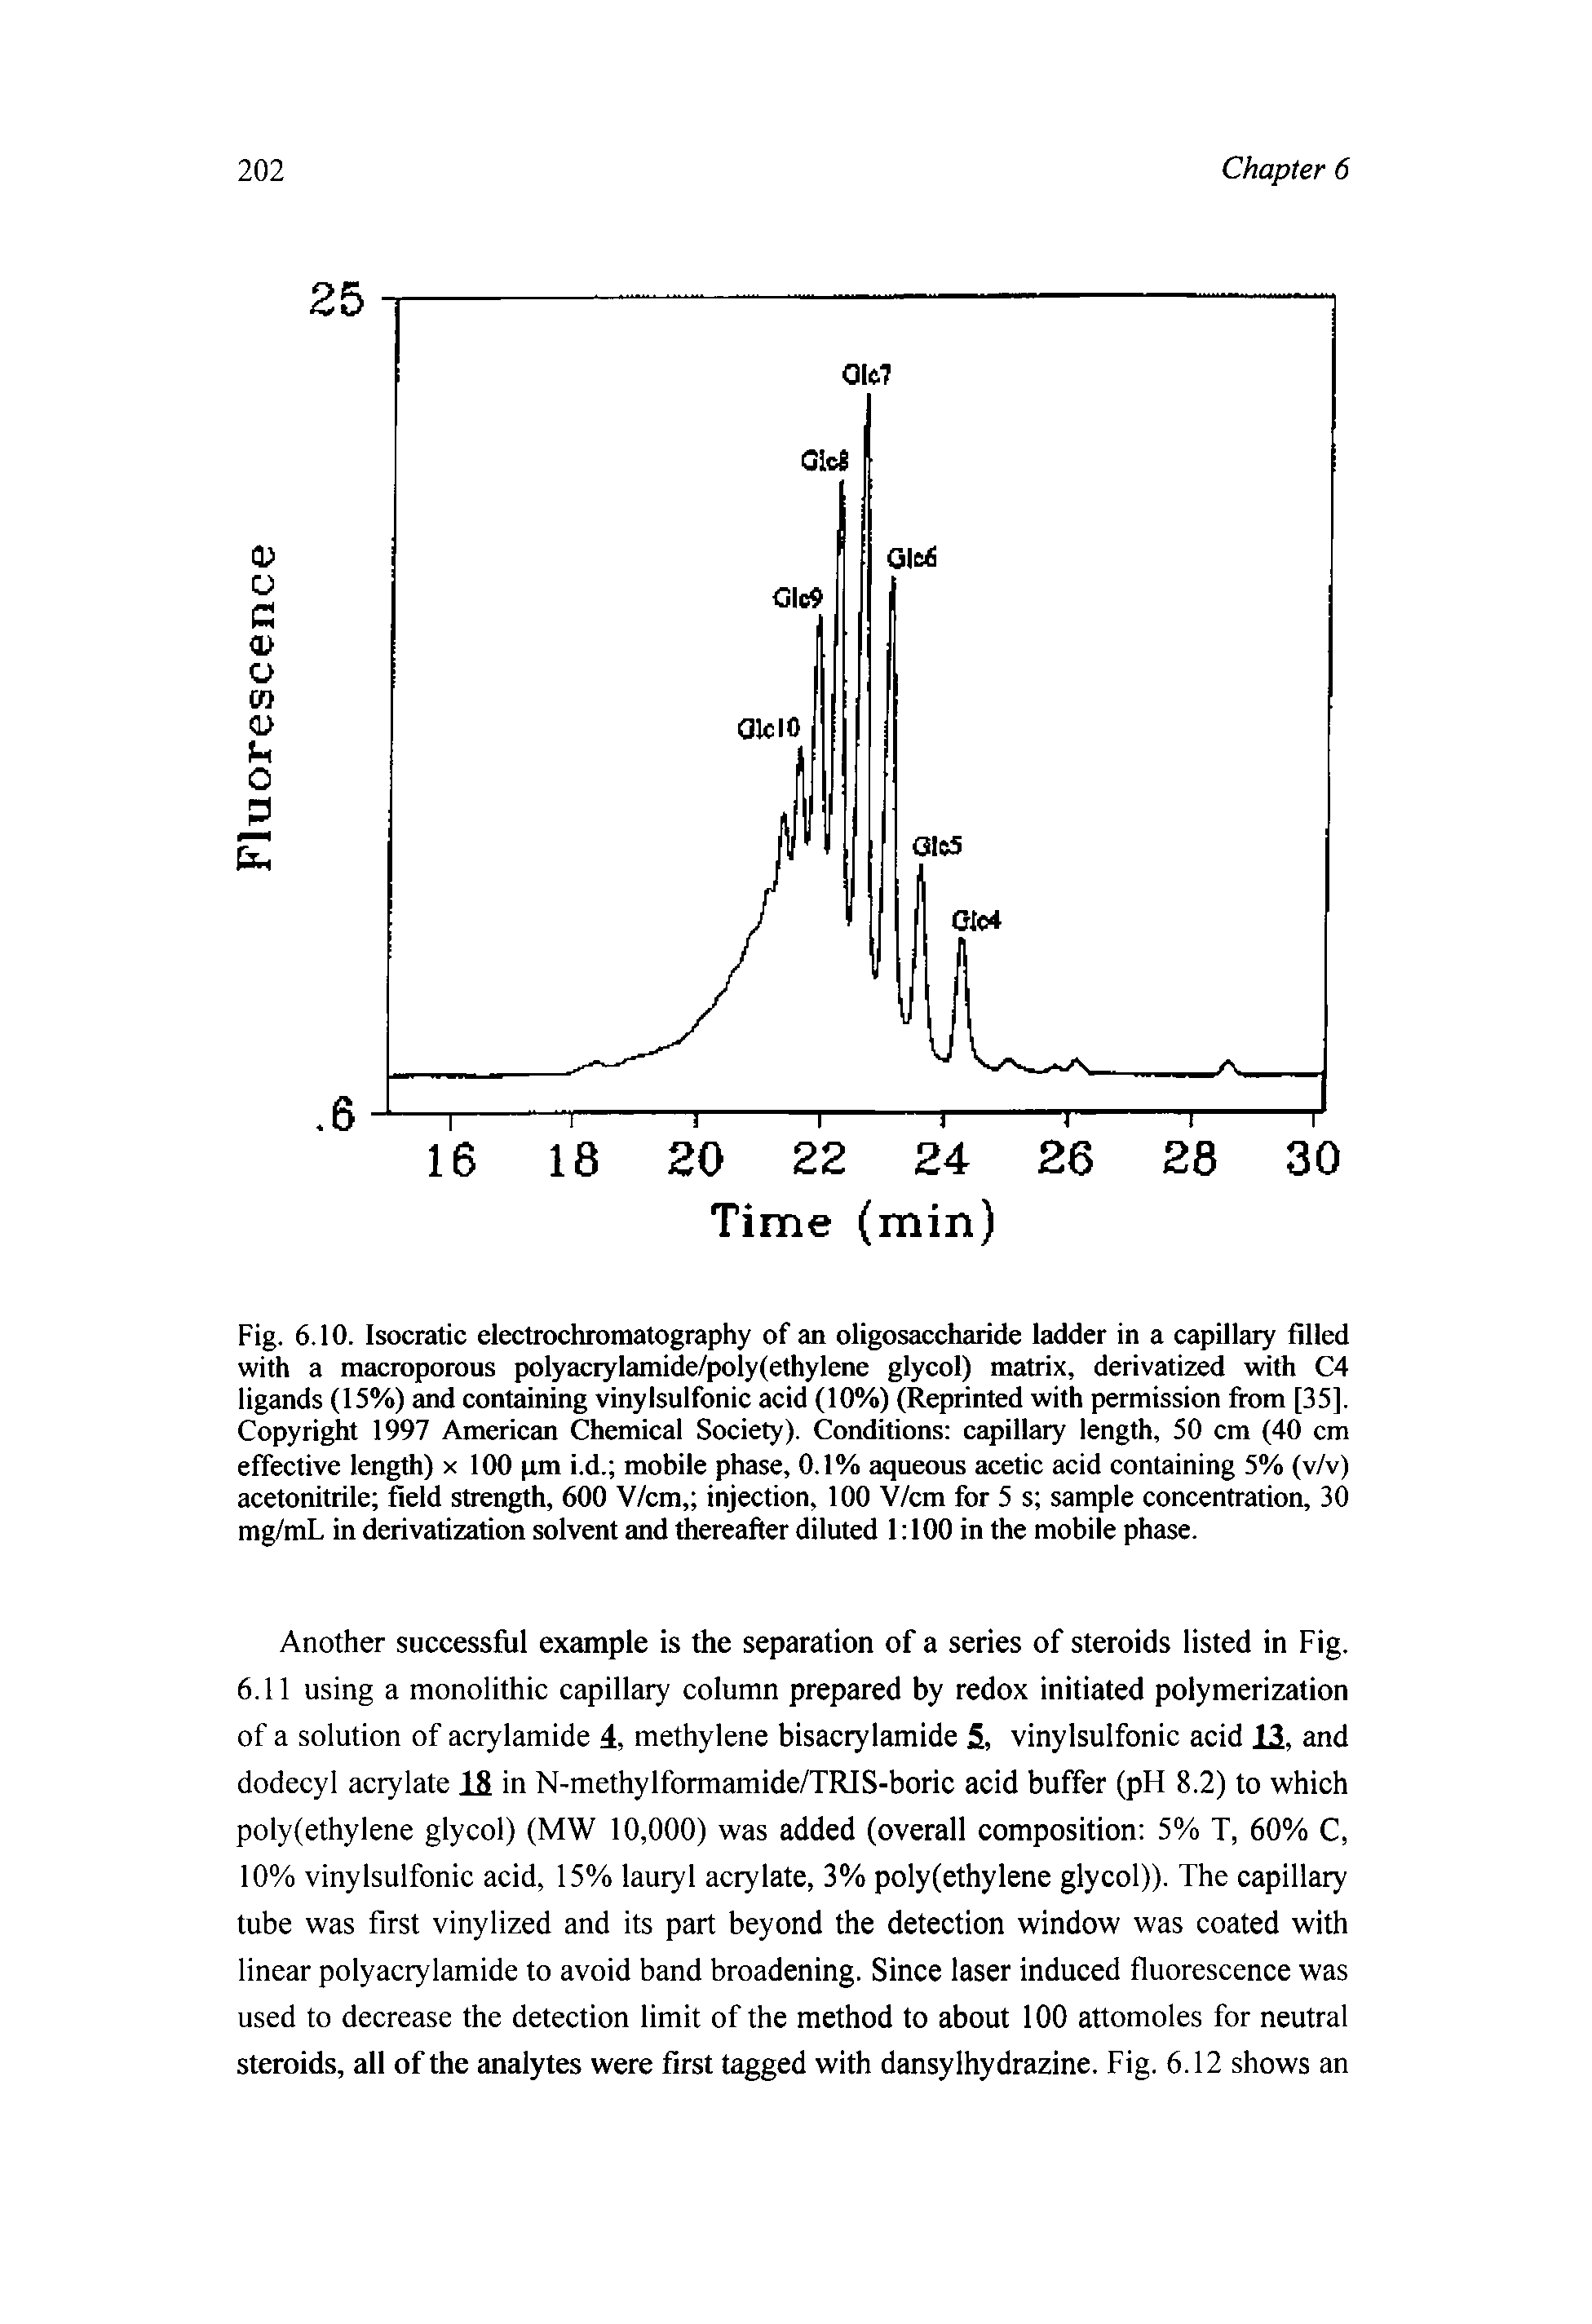 Fig. 6.10. Isocratic electrochromatography of an oligosaccharide ladder in a capillary filled with a macroporous polyacrylamide/poly(ethylene glycol) matrix, derivatized with C4 ligands (15%) and containing vinylsulfonic acid (10%) (Reprinted with permission from [35]. Copyright 1997 American Chemical Society). Conditions capillary length, 50 cm (40 cm effective length) x 100 pm i.d. mobile phase, 0.1% aqueous acetic acid containing 5% (v/v) acetonitrile field strength, 600 V/cm, injection, 100 V/cm for 5 s sample concentration, 30 mg/mL in derivatization solvent and thereafter diluted 1 100 in the mobile phase.